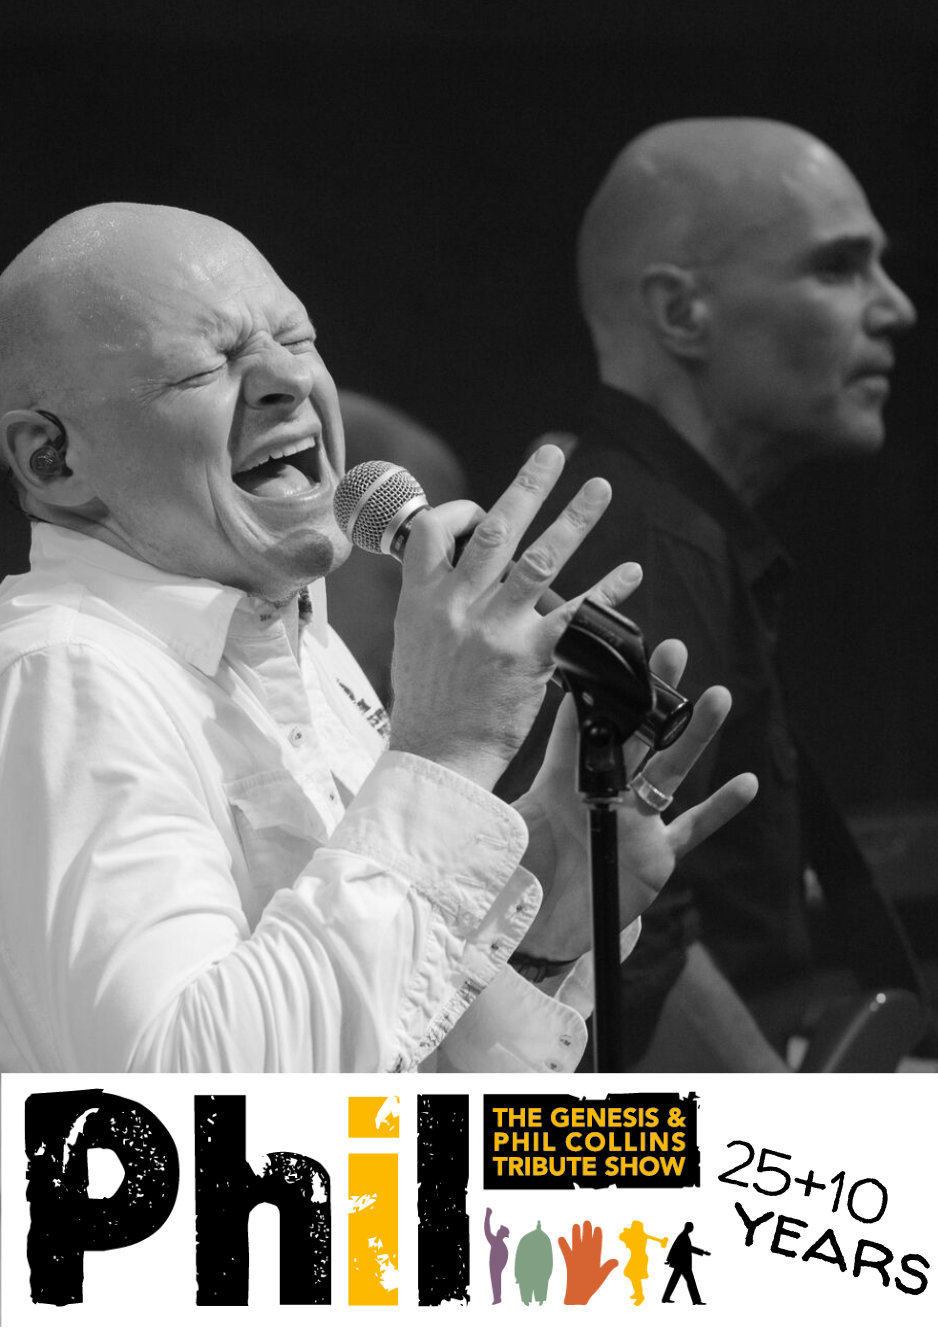 PHIL – 25+10 YEARS – The Genesis & Phil Collins Tribute Show